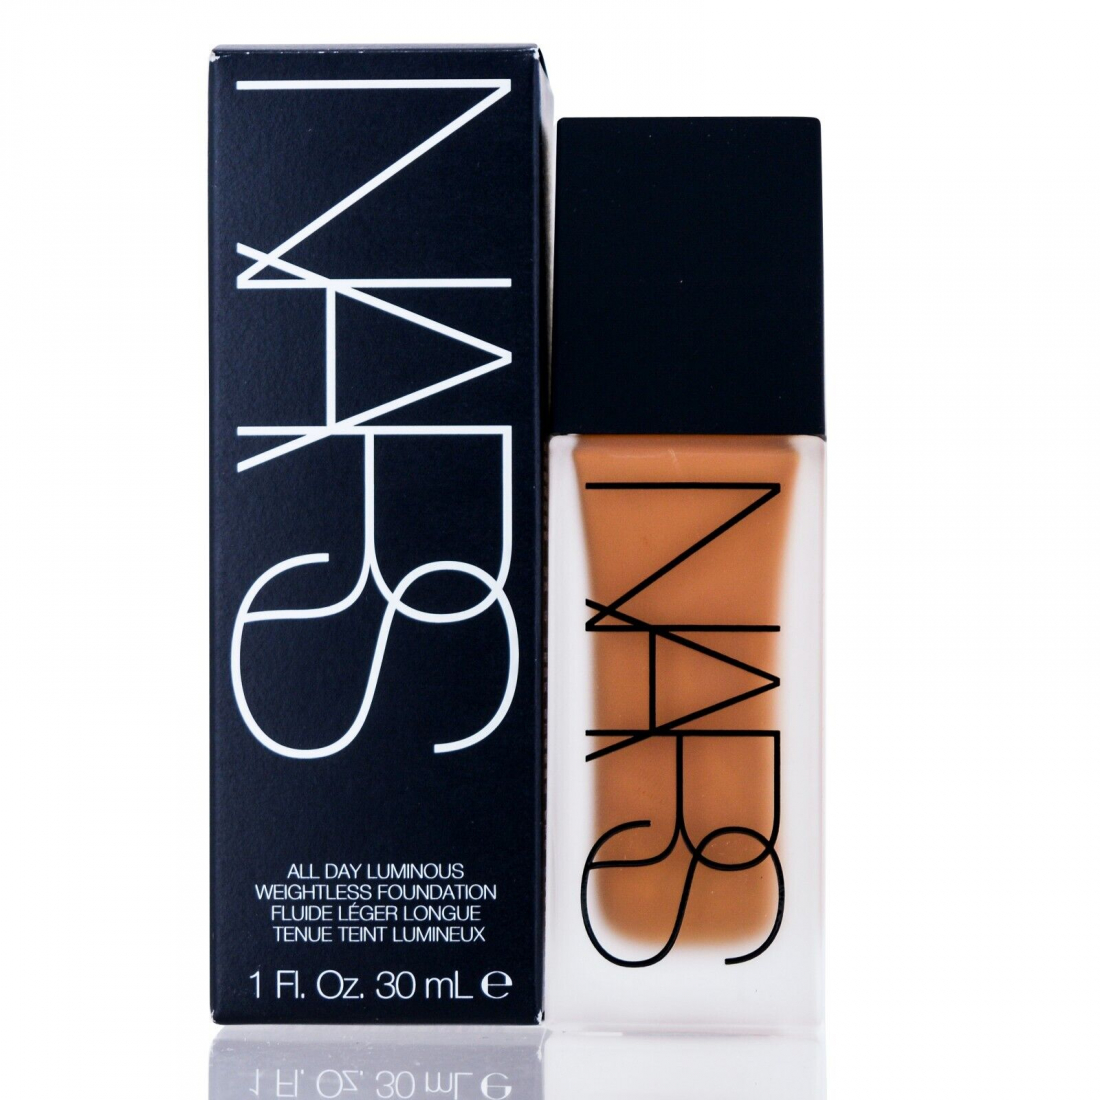 'All Day Luminous Weightless' Foundation - New Orleans 30 ml